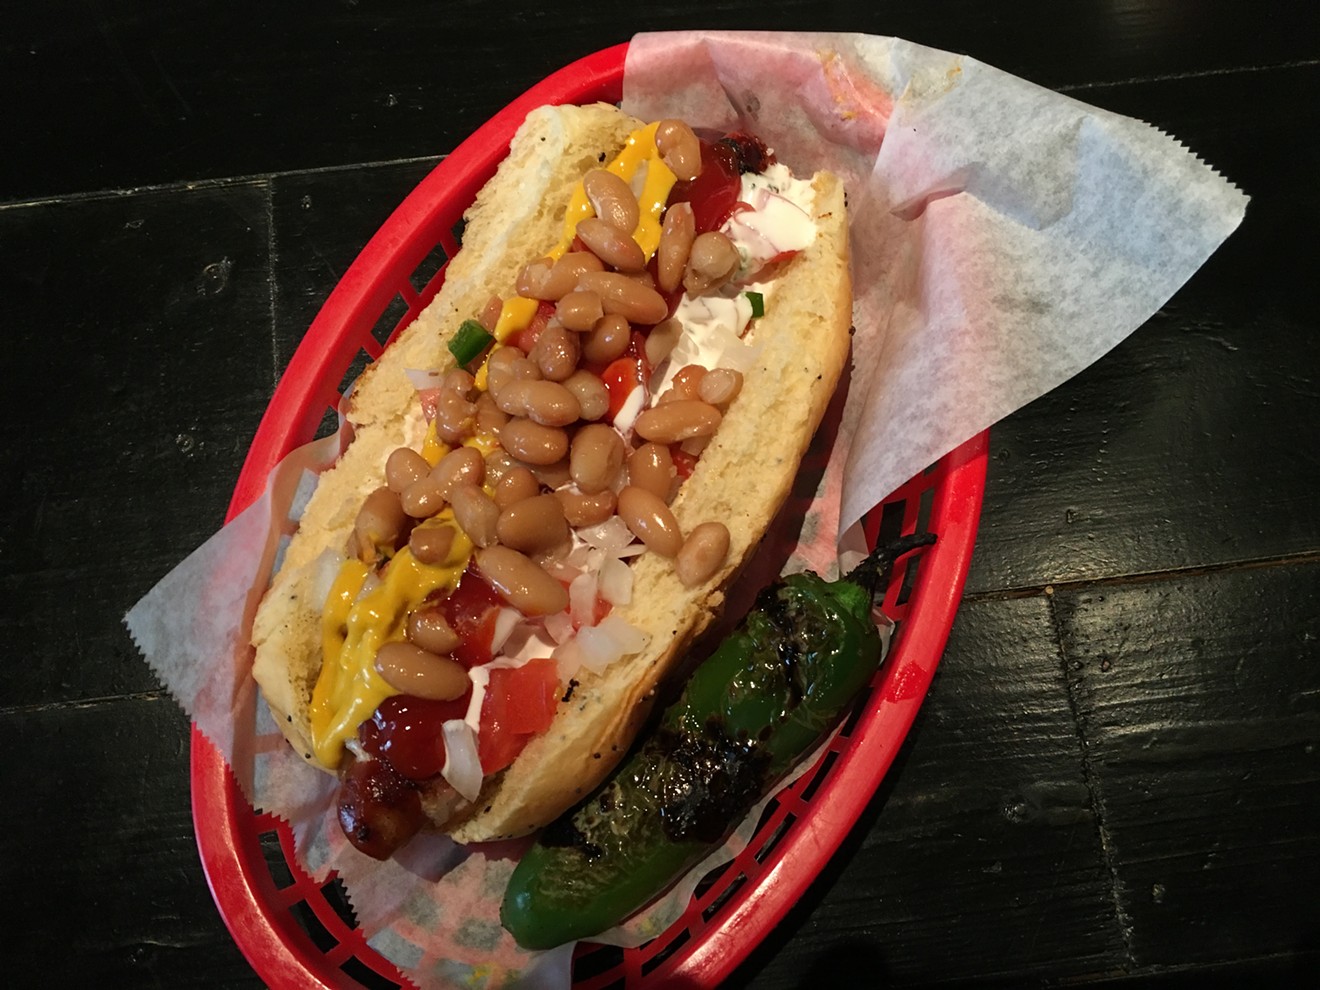 The Mexican Hot Dog at Revolver Taco Lounge ($9) uses a bacon-wrapped Luscher's Red Hot and a bun from Fort Worth's Swiss Pastry Shop.